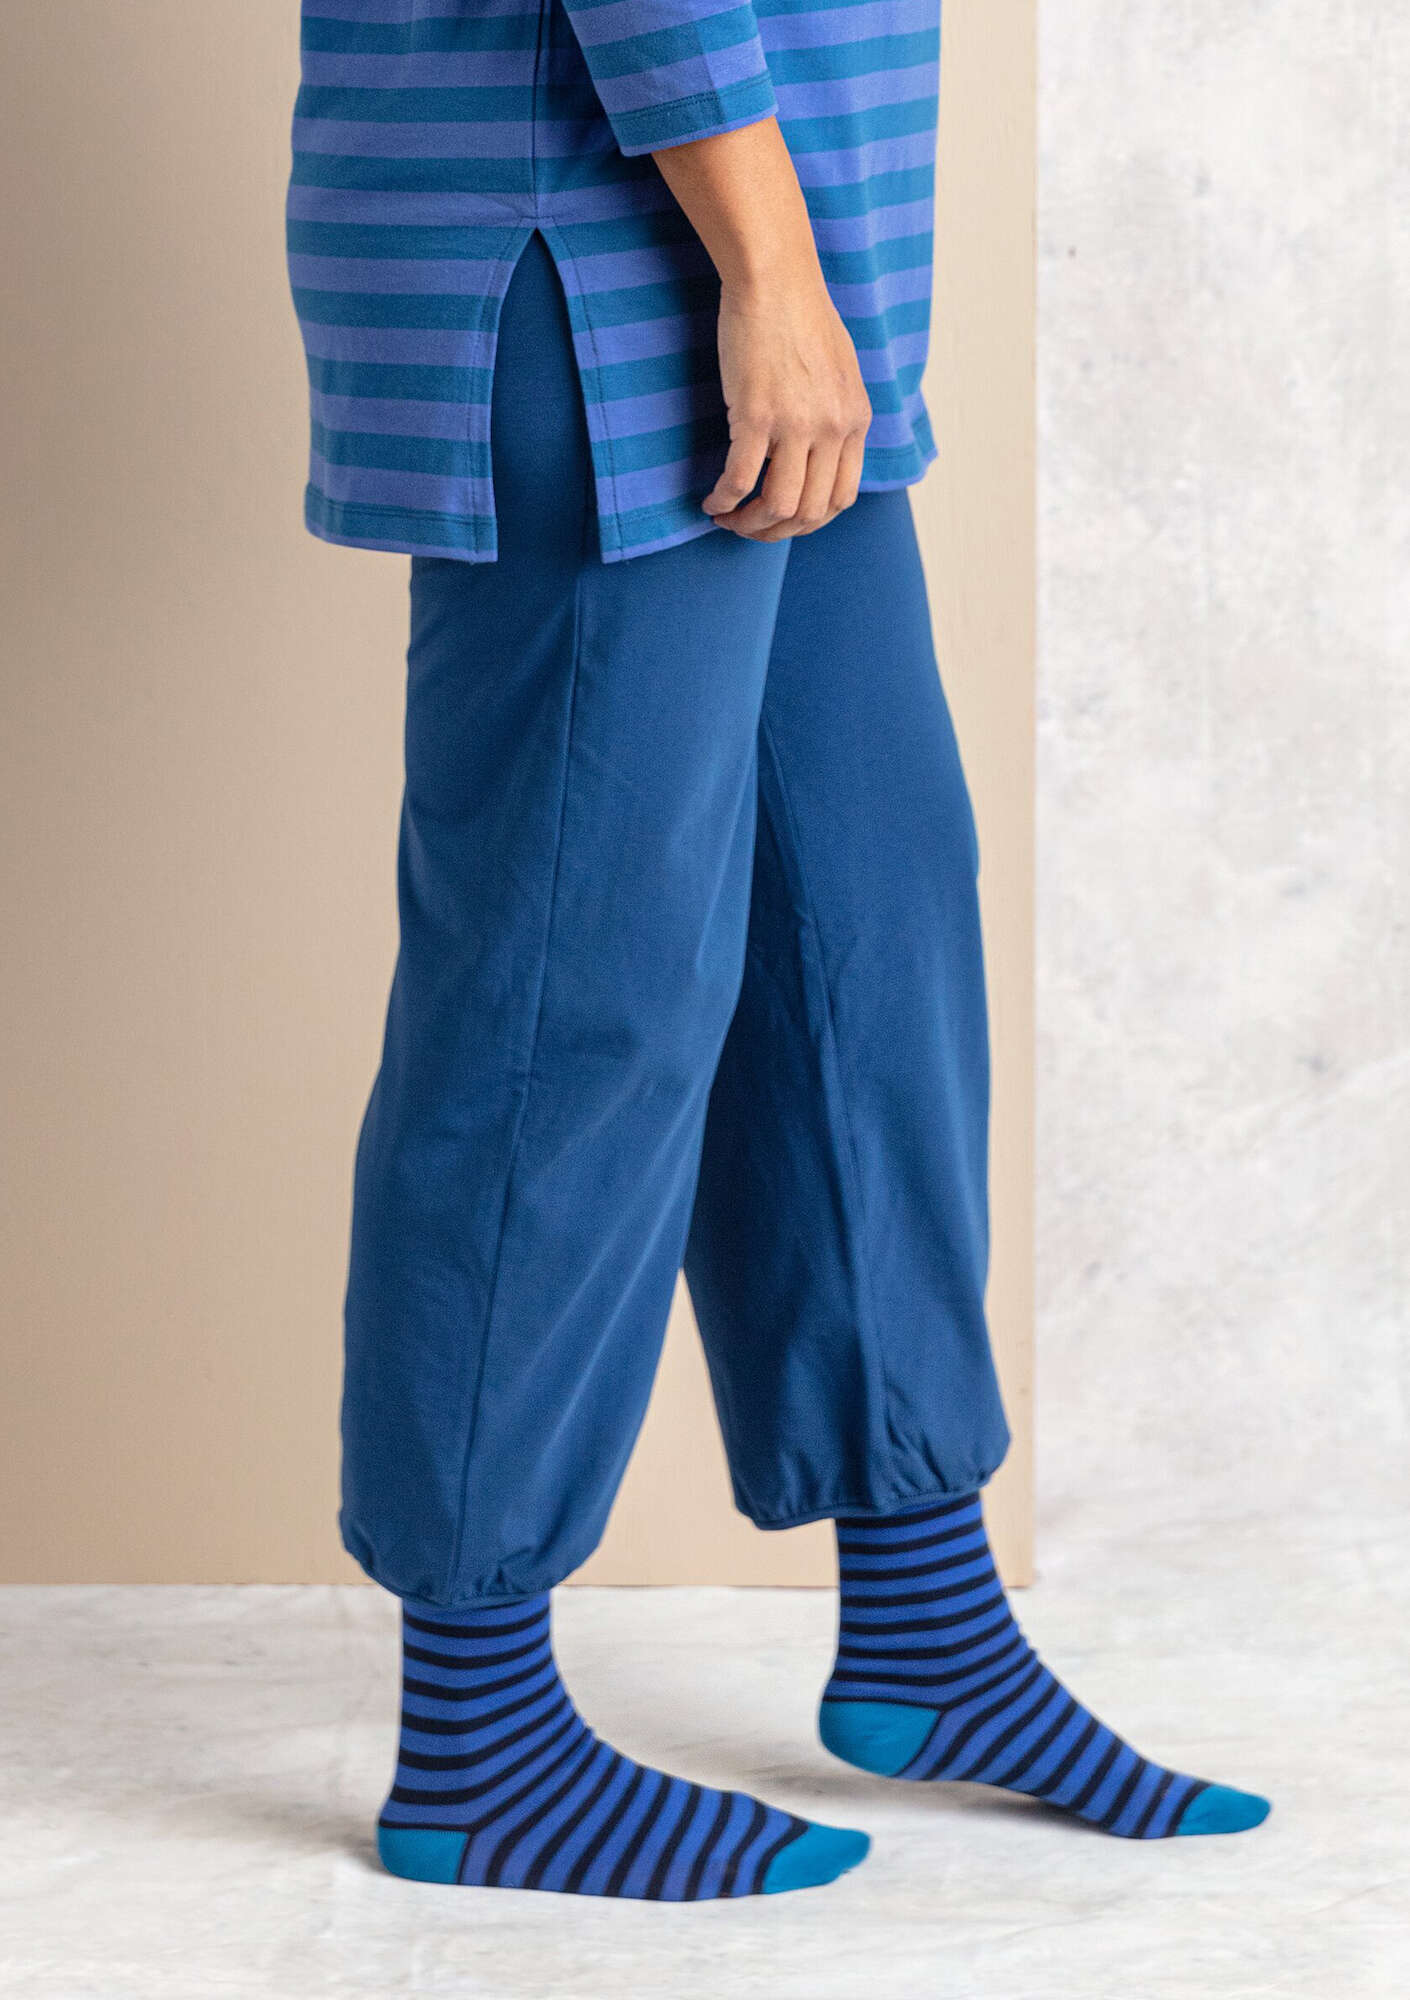 Solid-colored jersey pants indigo blue